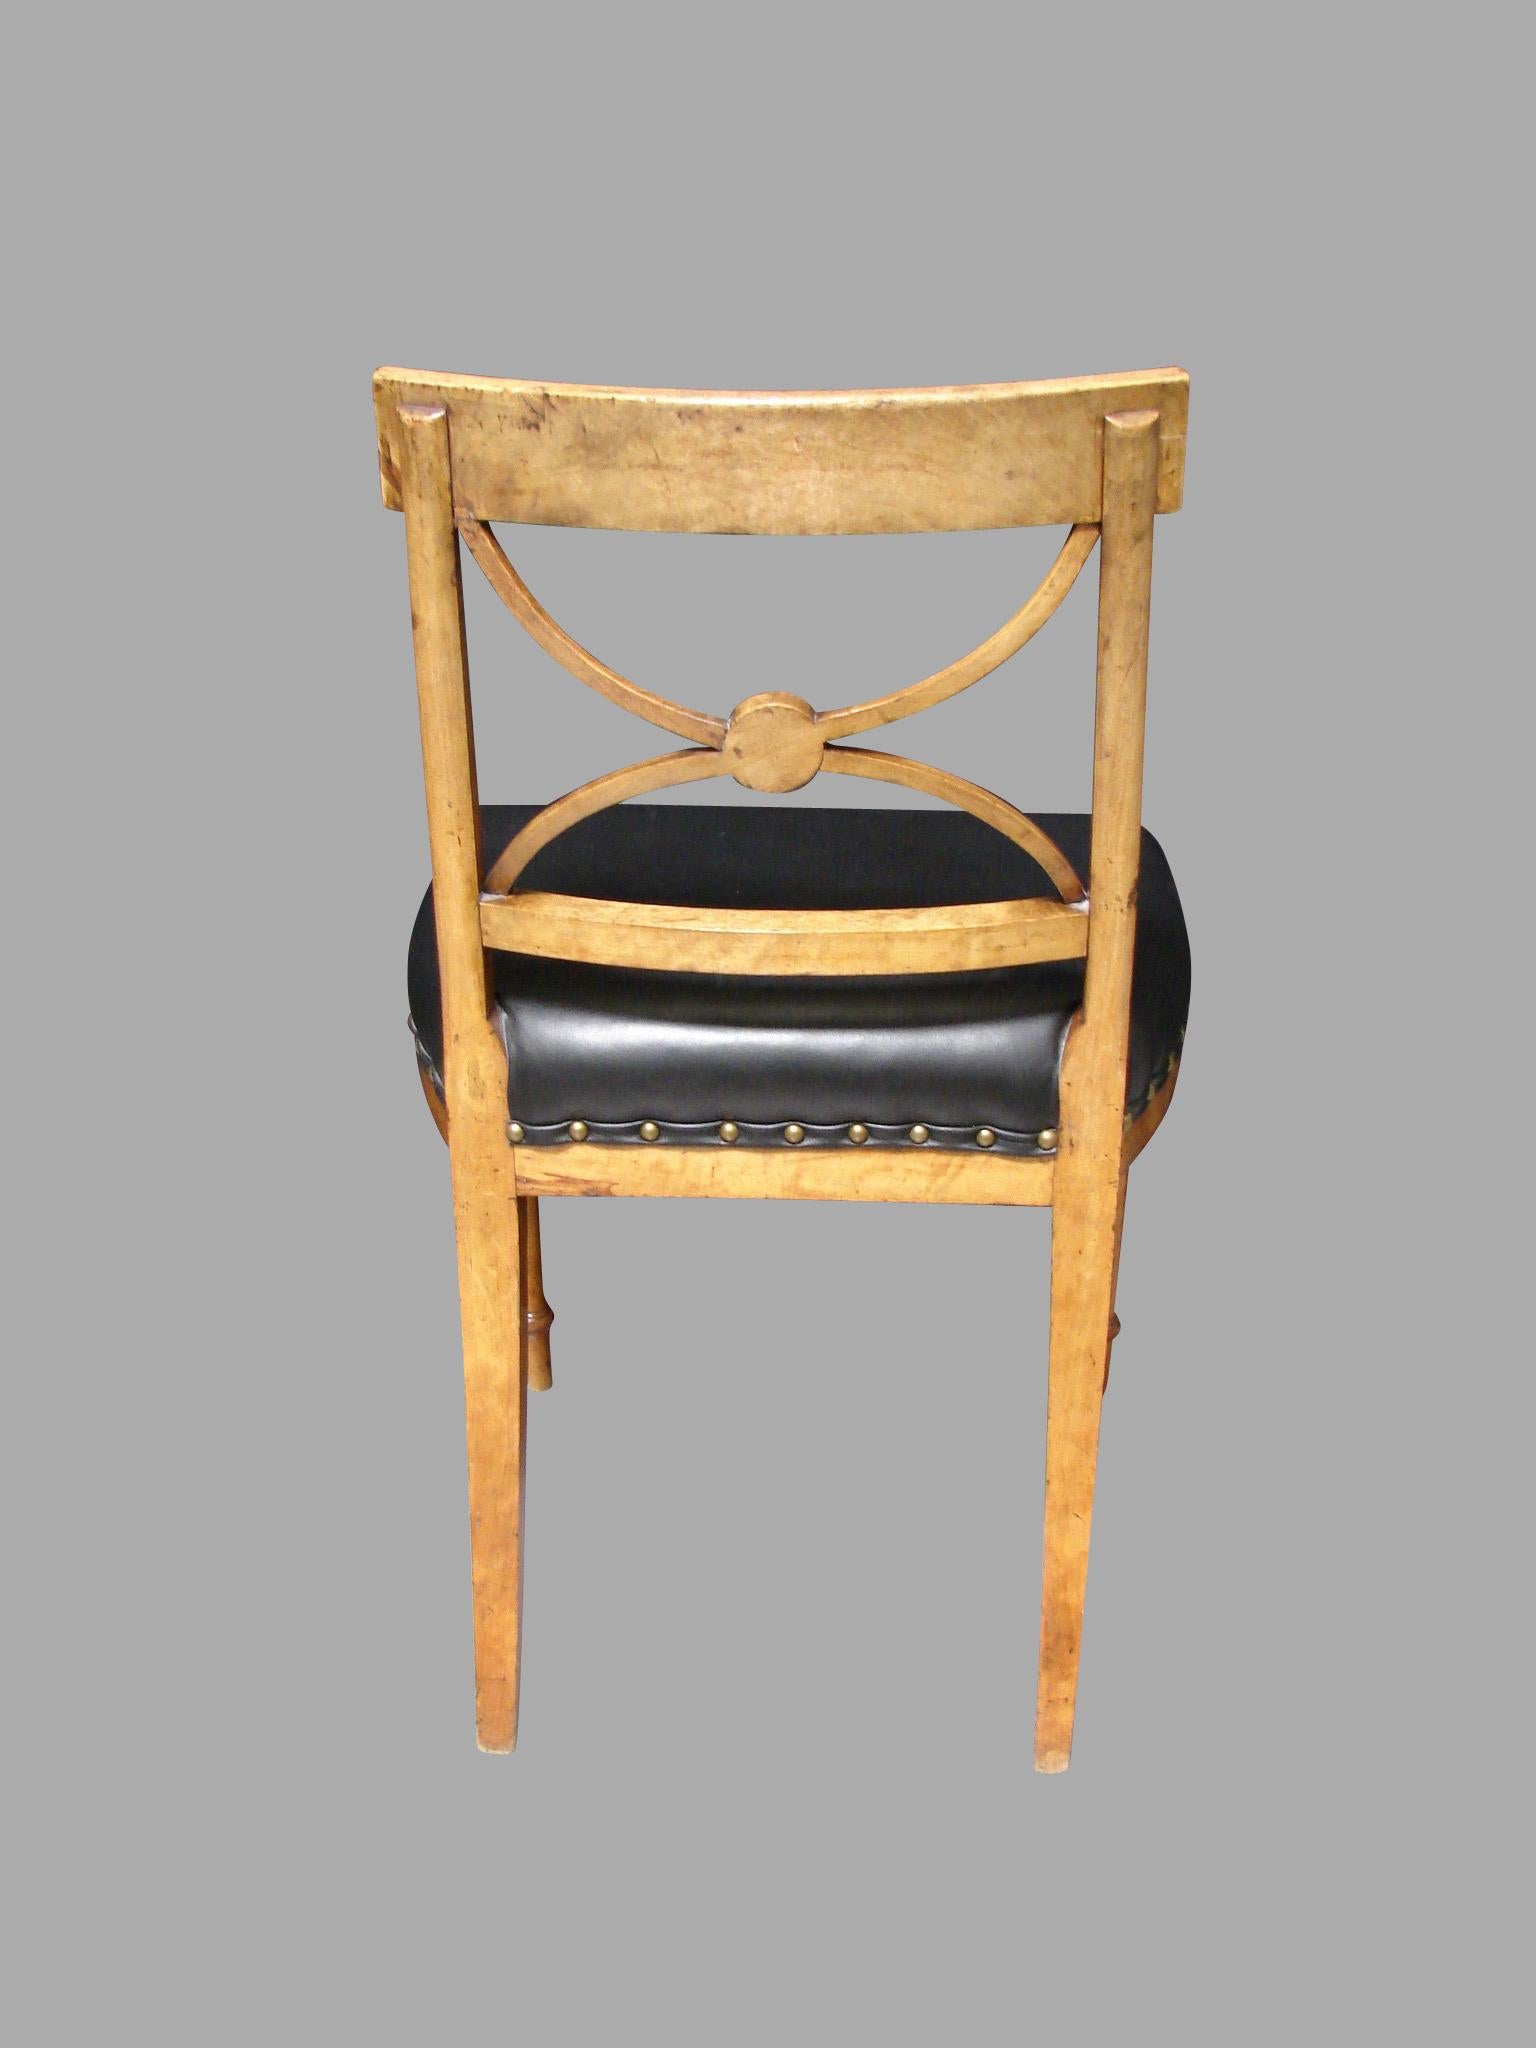 Austrian Biedermeier Fruitwood Side Chair with Ebonized Back and Black Leather Seat